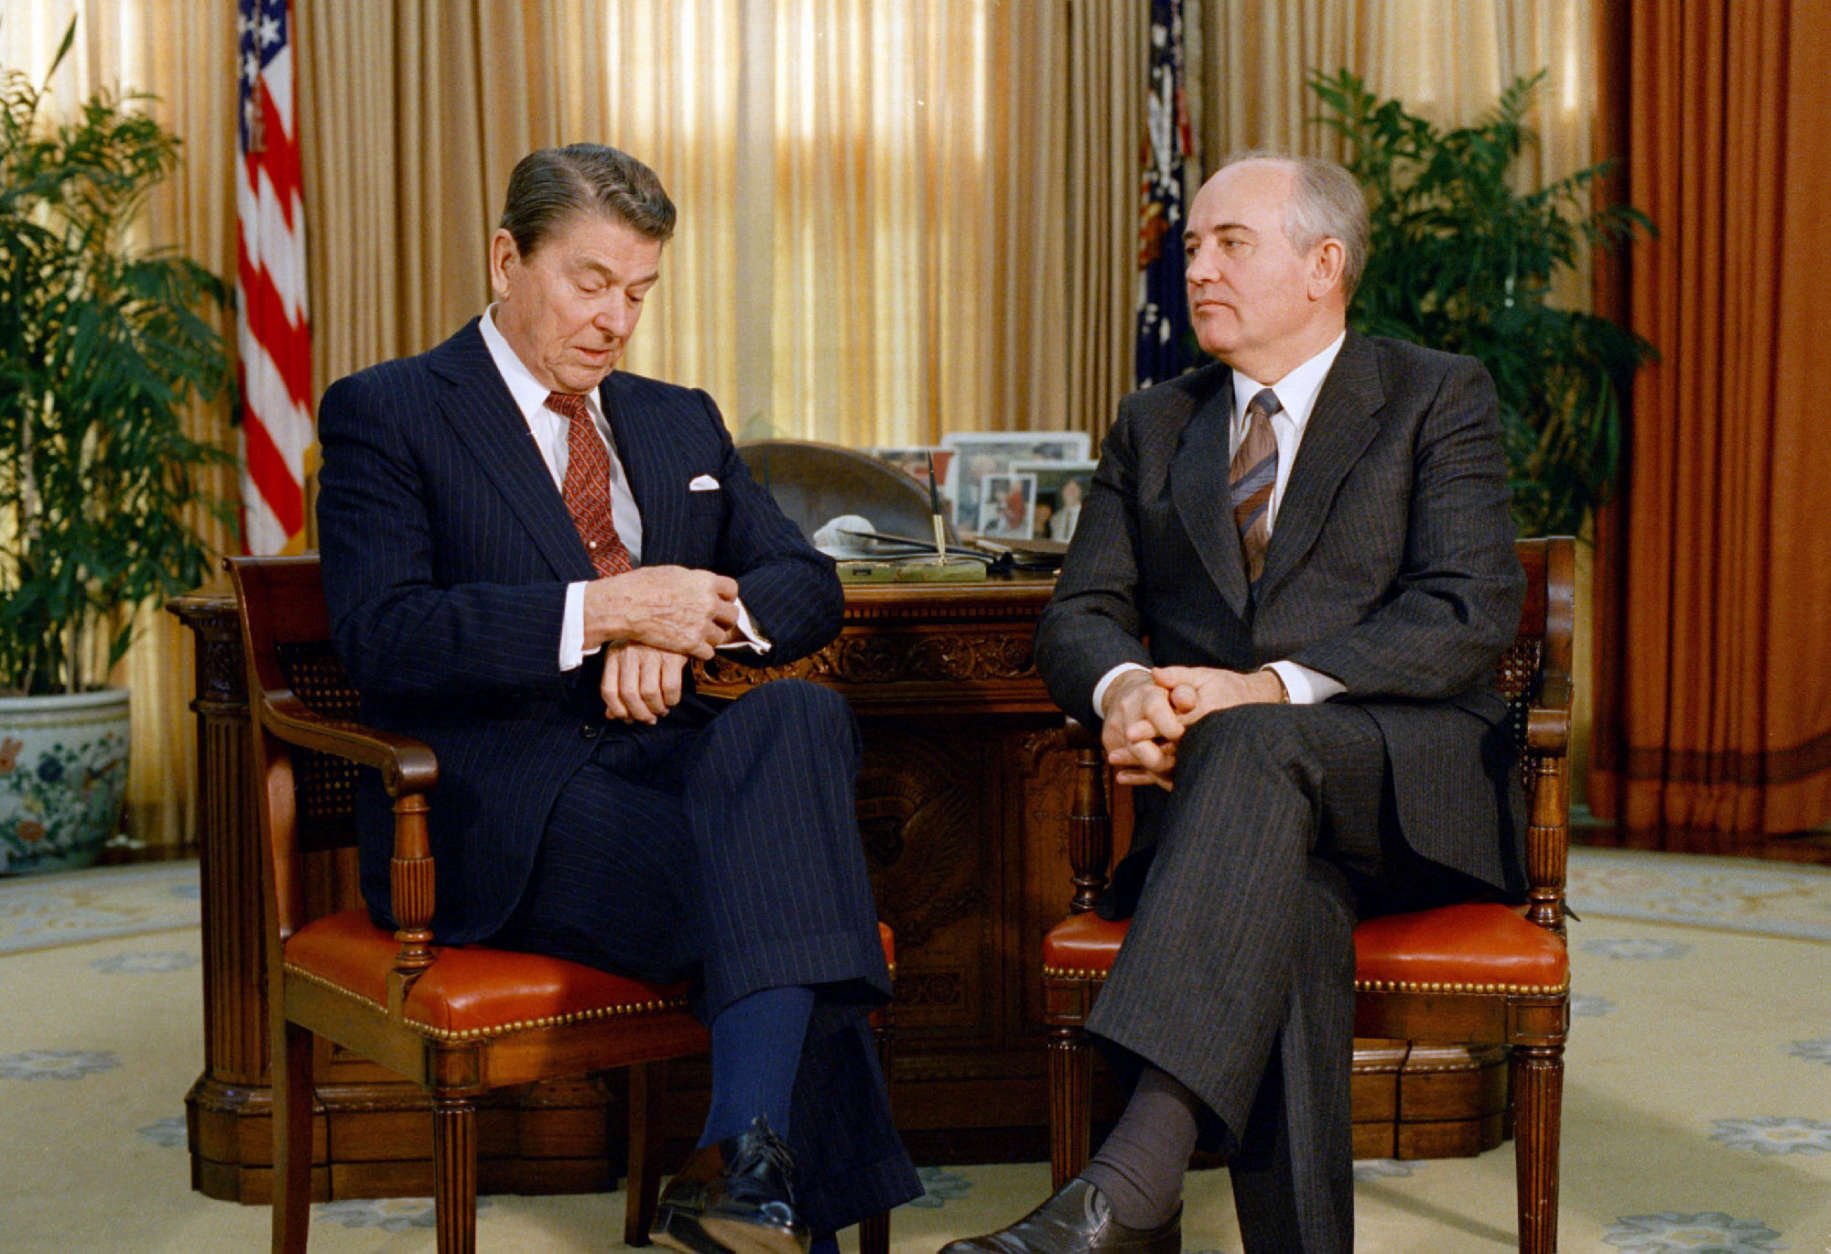 President Ronald Reagan checks his watch while talking with Soviet leader Mikhail Gorbachev during a meeting in the White House Oval Office, Dec. 9, 1987.  Reagan and Gorbachev were meeting for the third time in two days.  (AP Photo/J. Scott Applewhite)